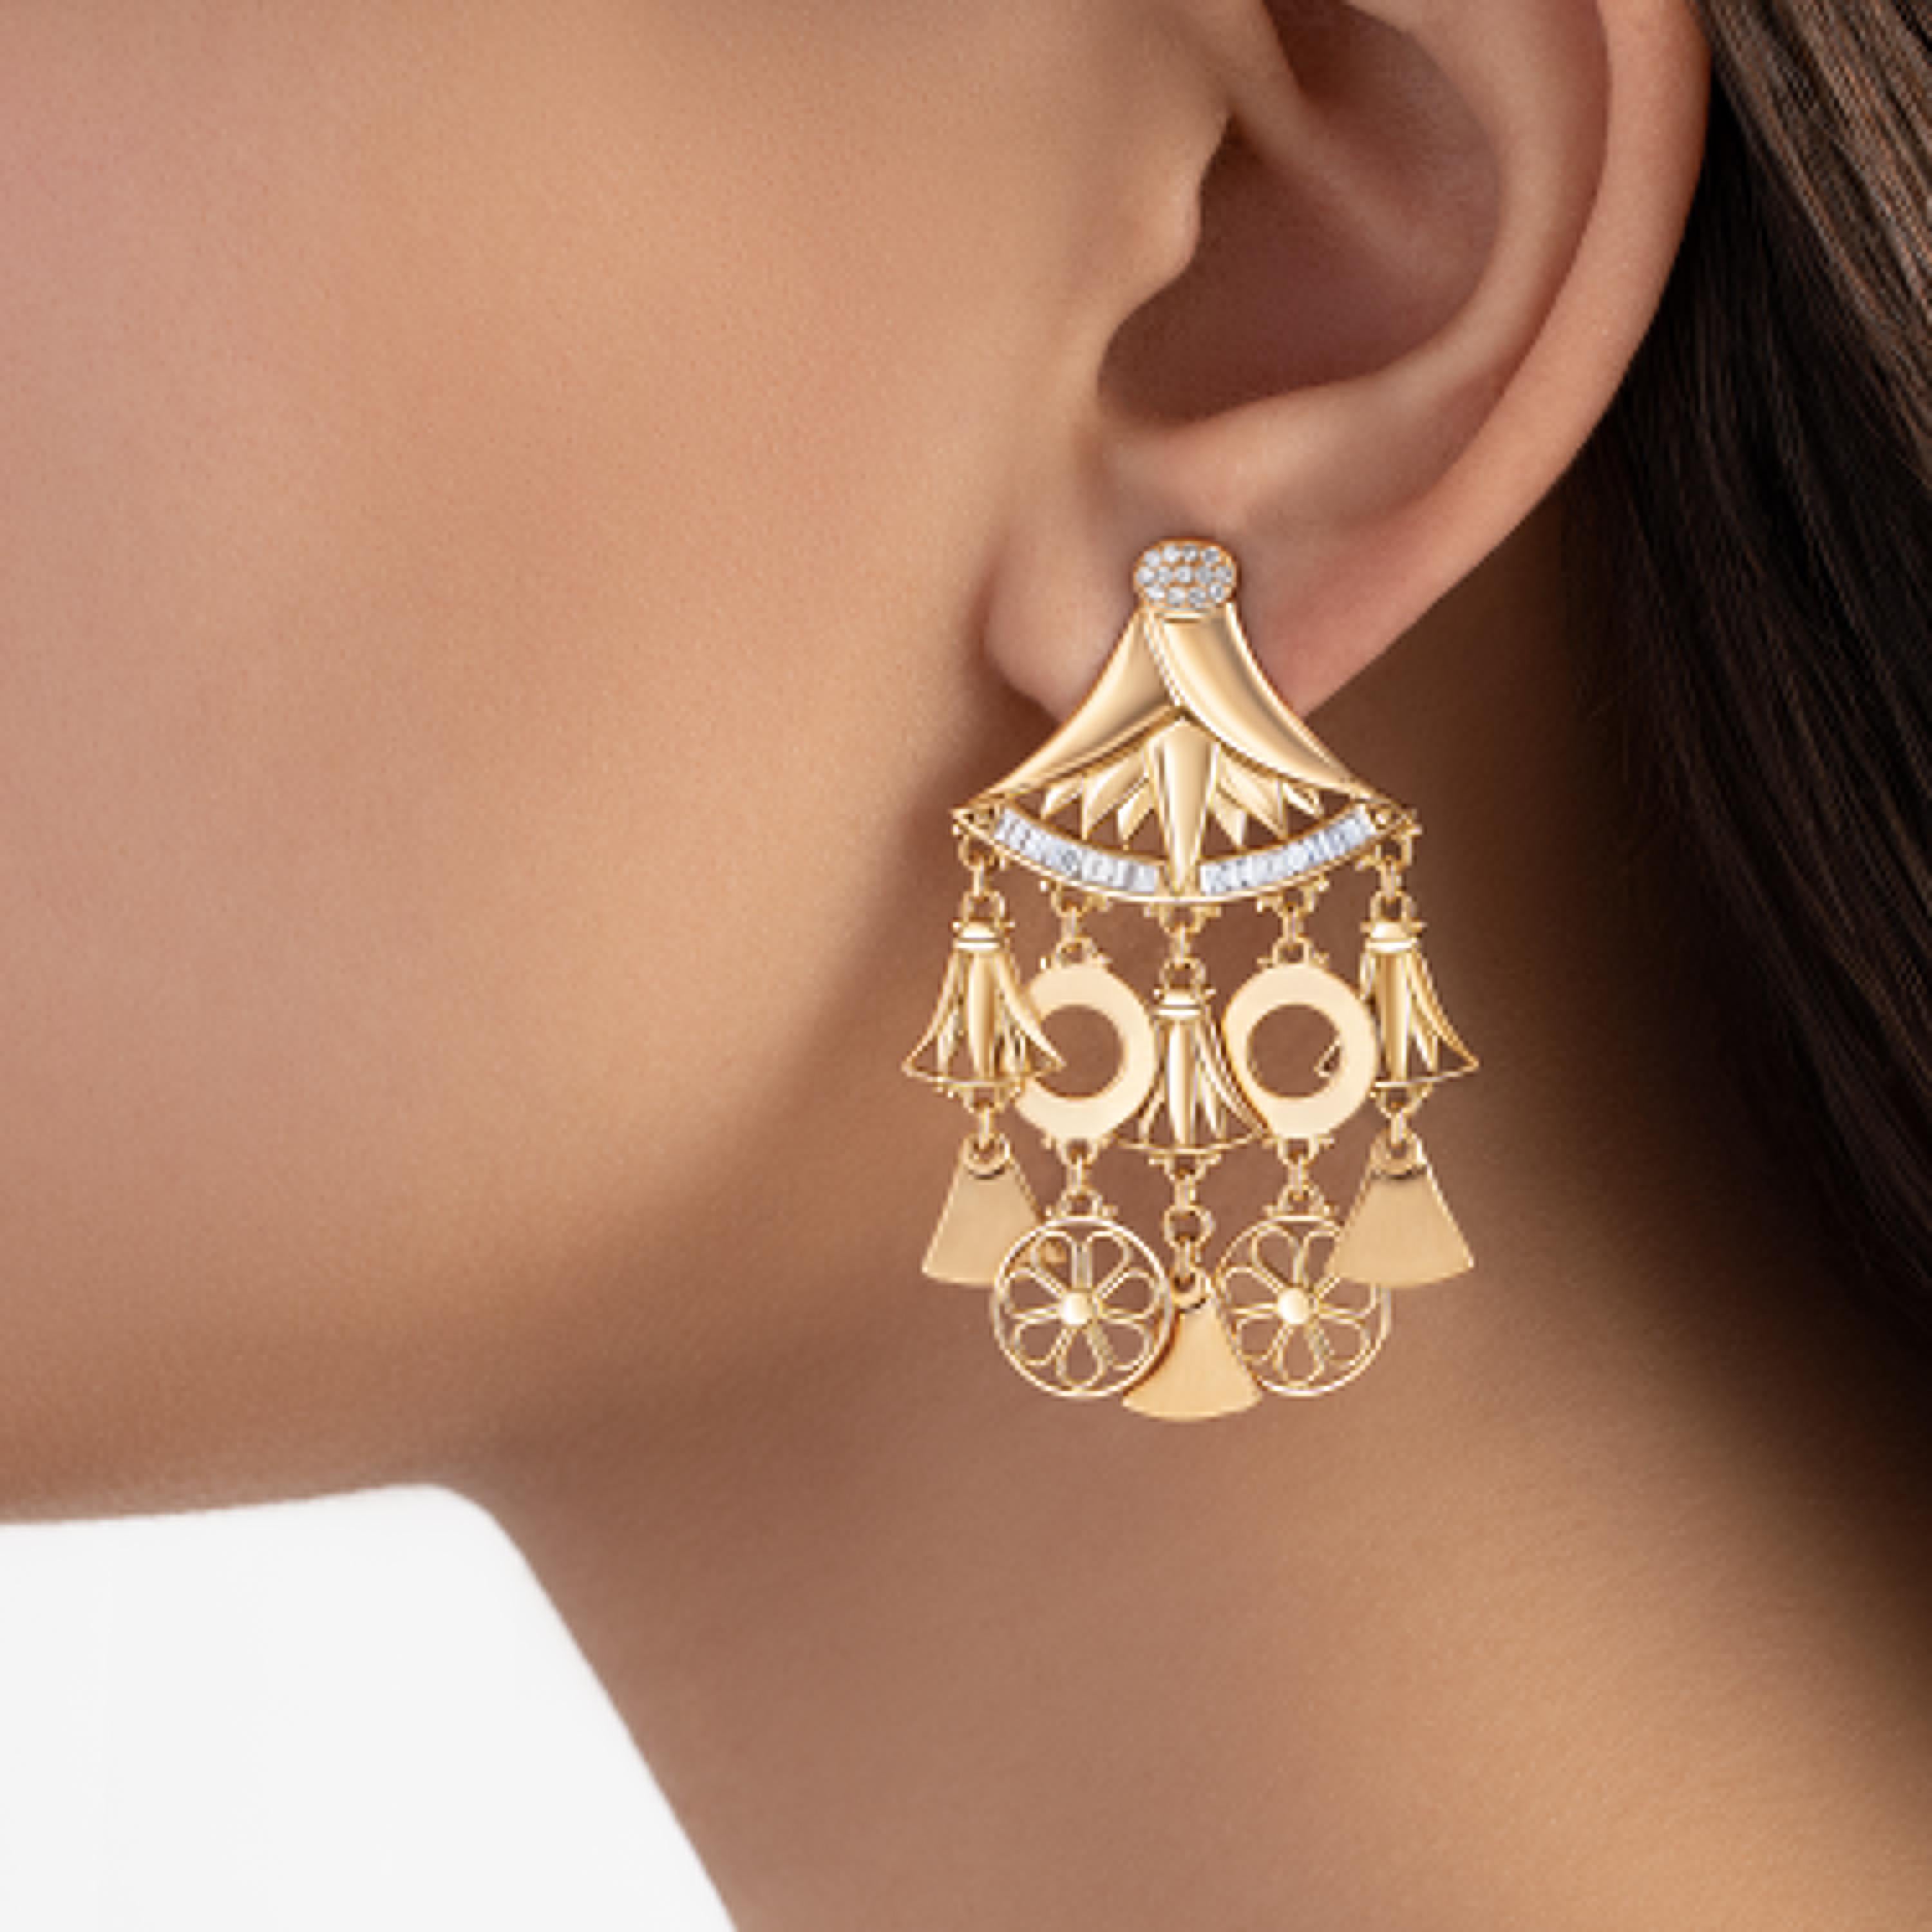 18 Karat Gold, Baguette-cut Diamond and pave-set Diamond Lotus Chandelier Earrings.
The radiant face of a fallaha (a woman of the Egyptian countryside) is marked by the sun from long, intimate hours spent with the land. Her jewellery speaks of her